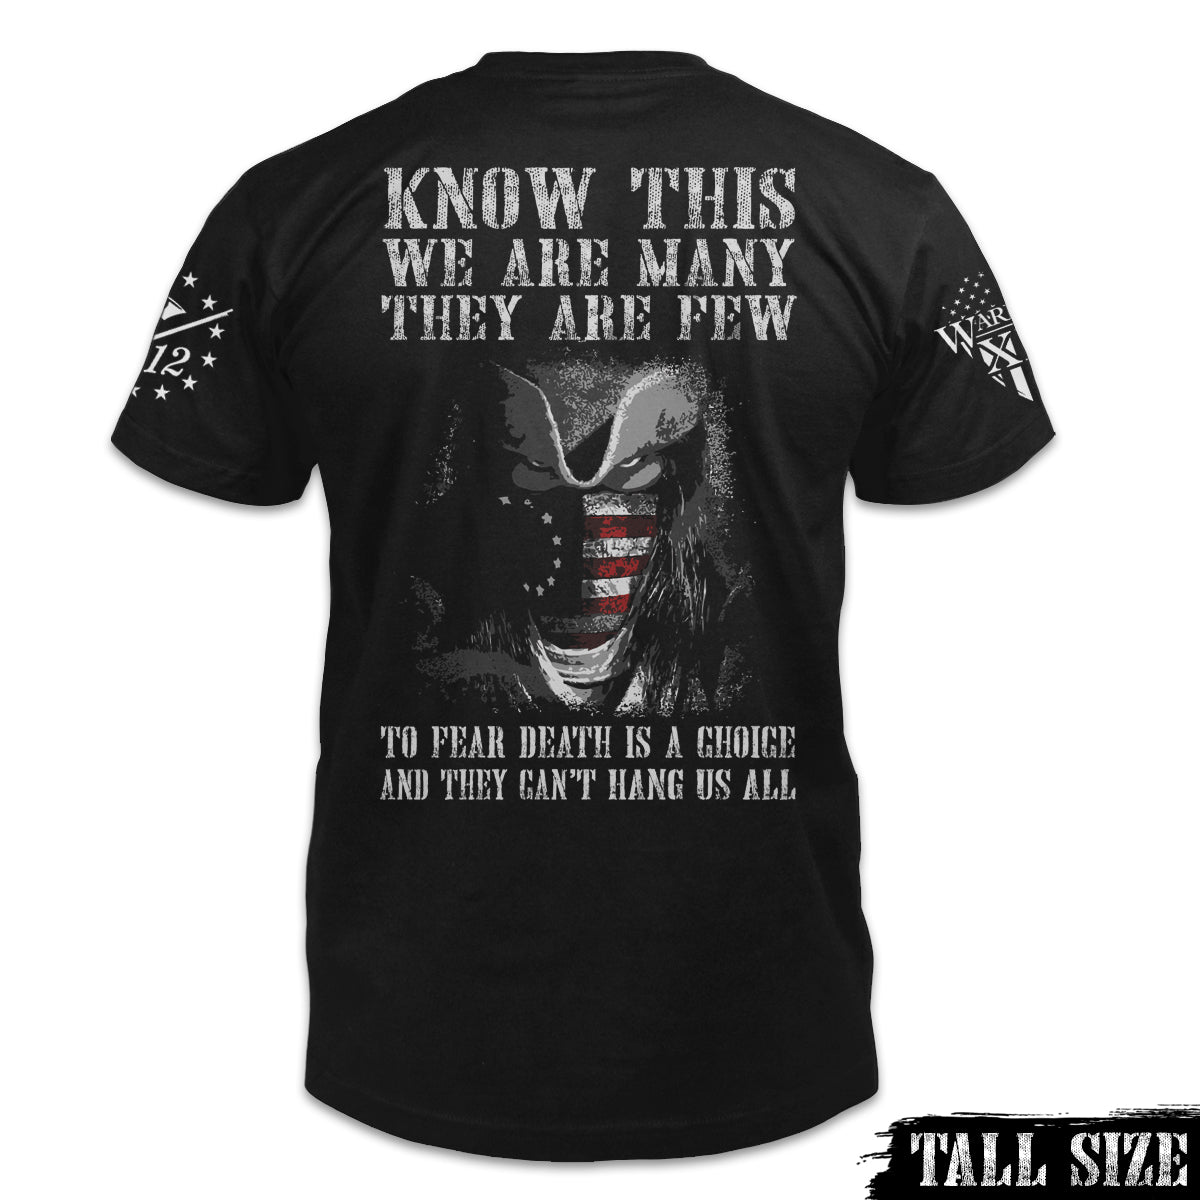 A black tall sized shirt with the words, "Know This, We Are Many They Are Few. To Fear Death Is A Choice, And They Can't Hang Us All" printed on the back of the shirt.